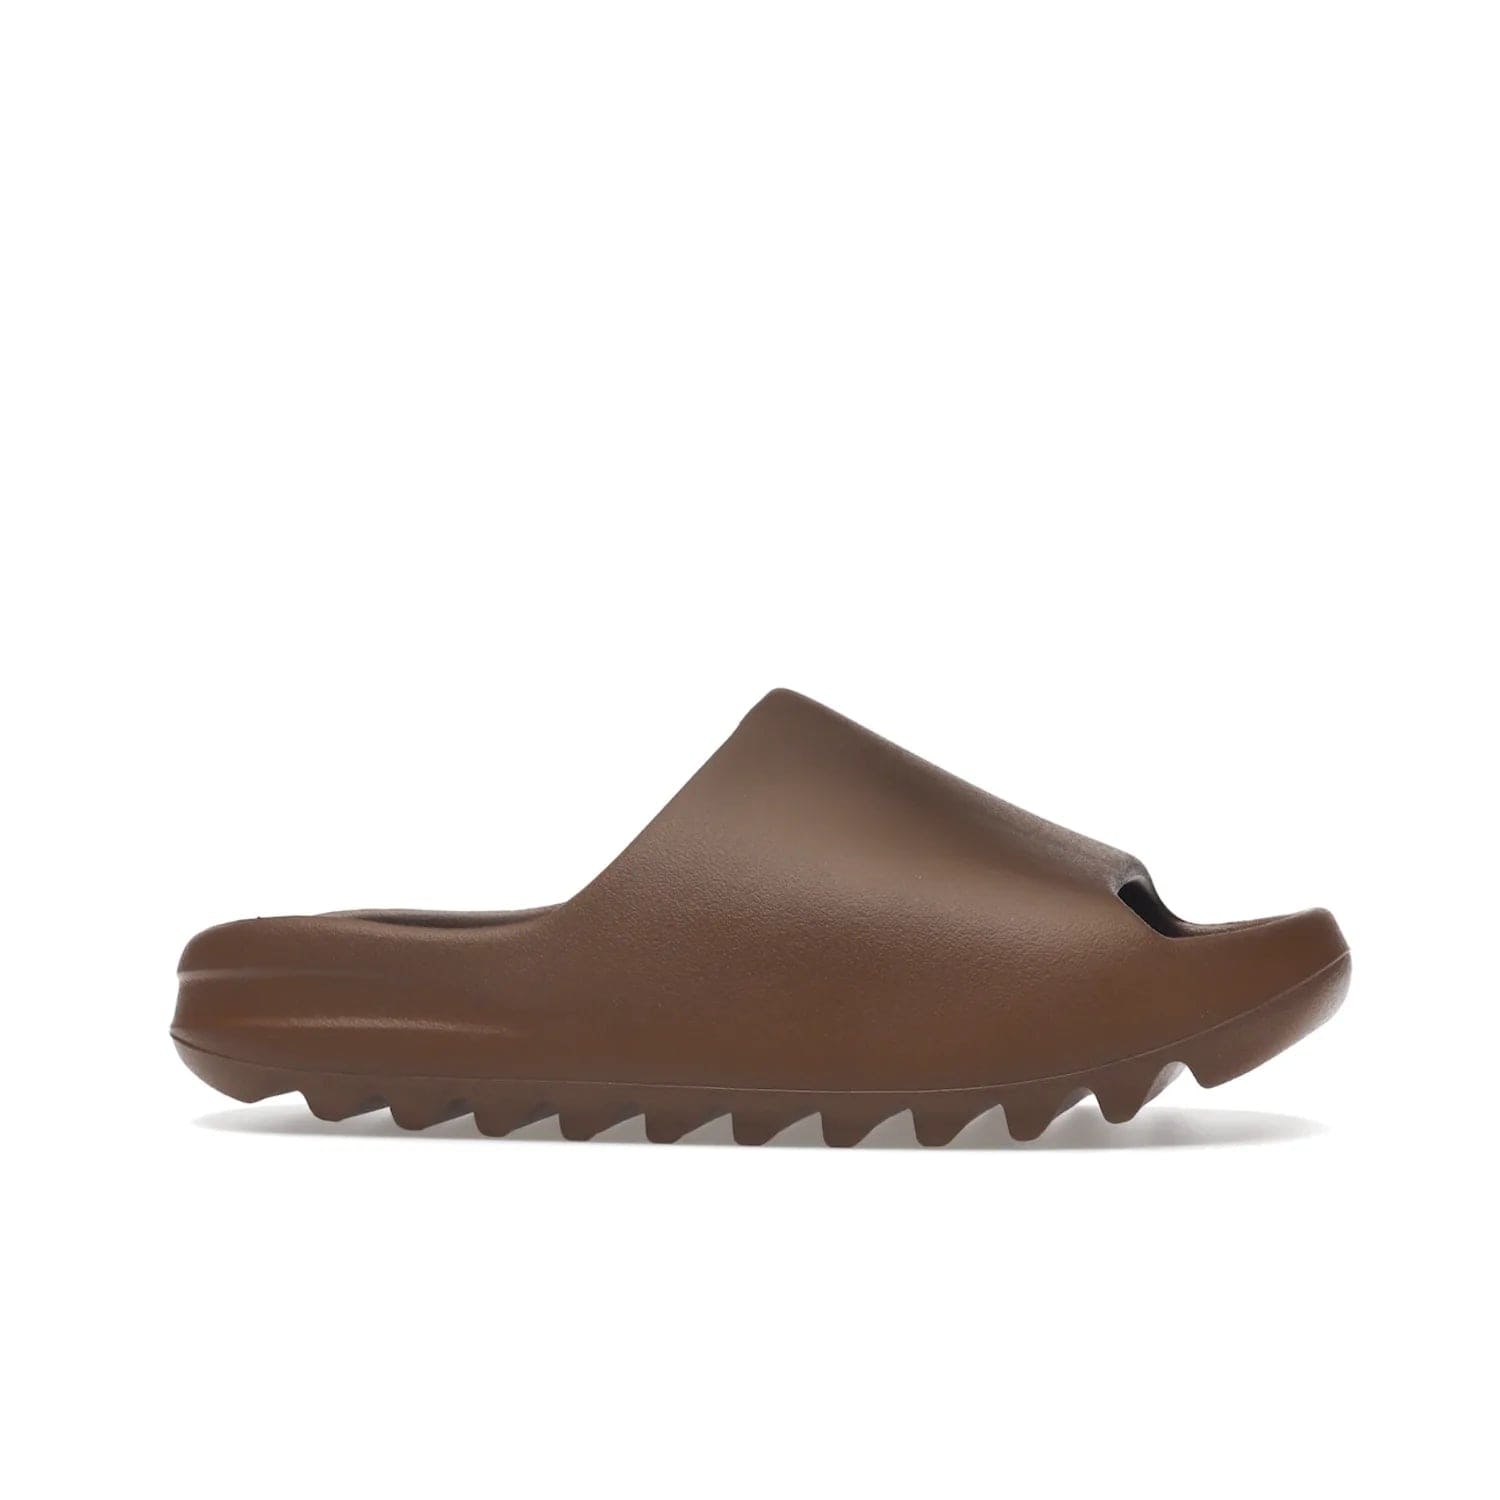 adidas Yeezy Slide Flax - Image 2 - Only at www.BallersClubKickz.com - Score the perfect casual look with the adidas Yeezy Slide Flax. Made with lightweight injected EVA plus horizontal grooves underfoot for traction. Release on August 22, 2022. $70.